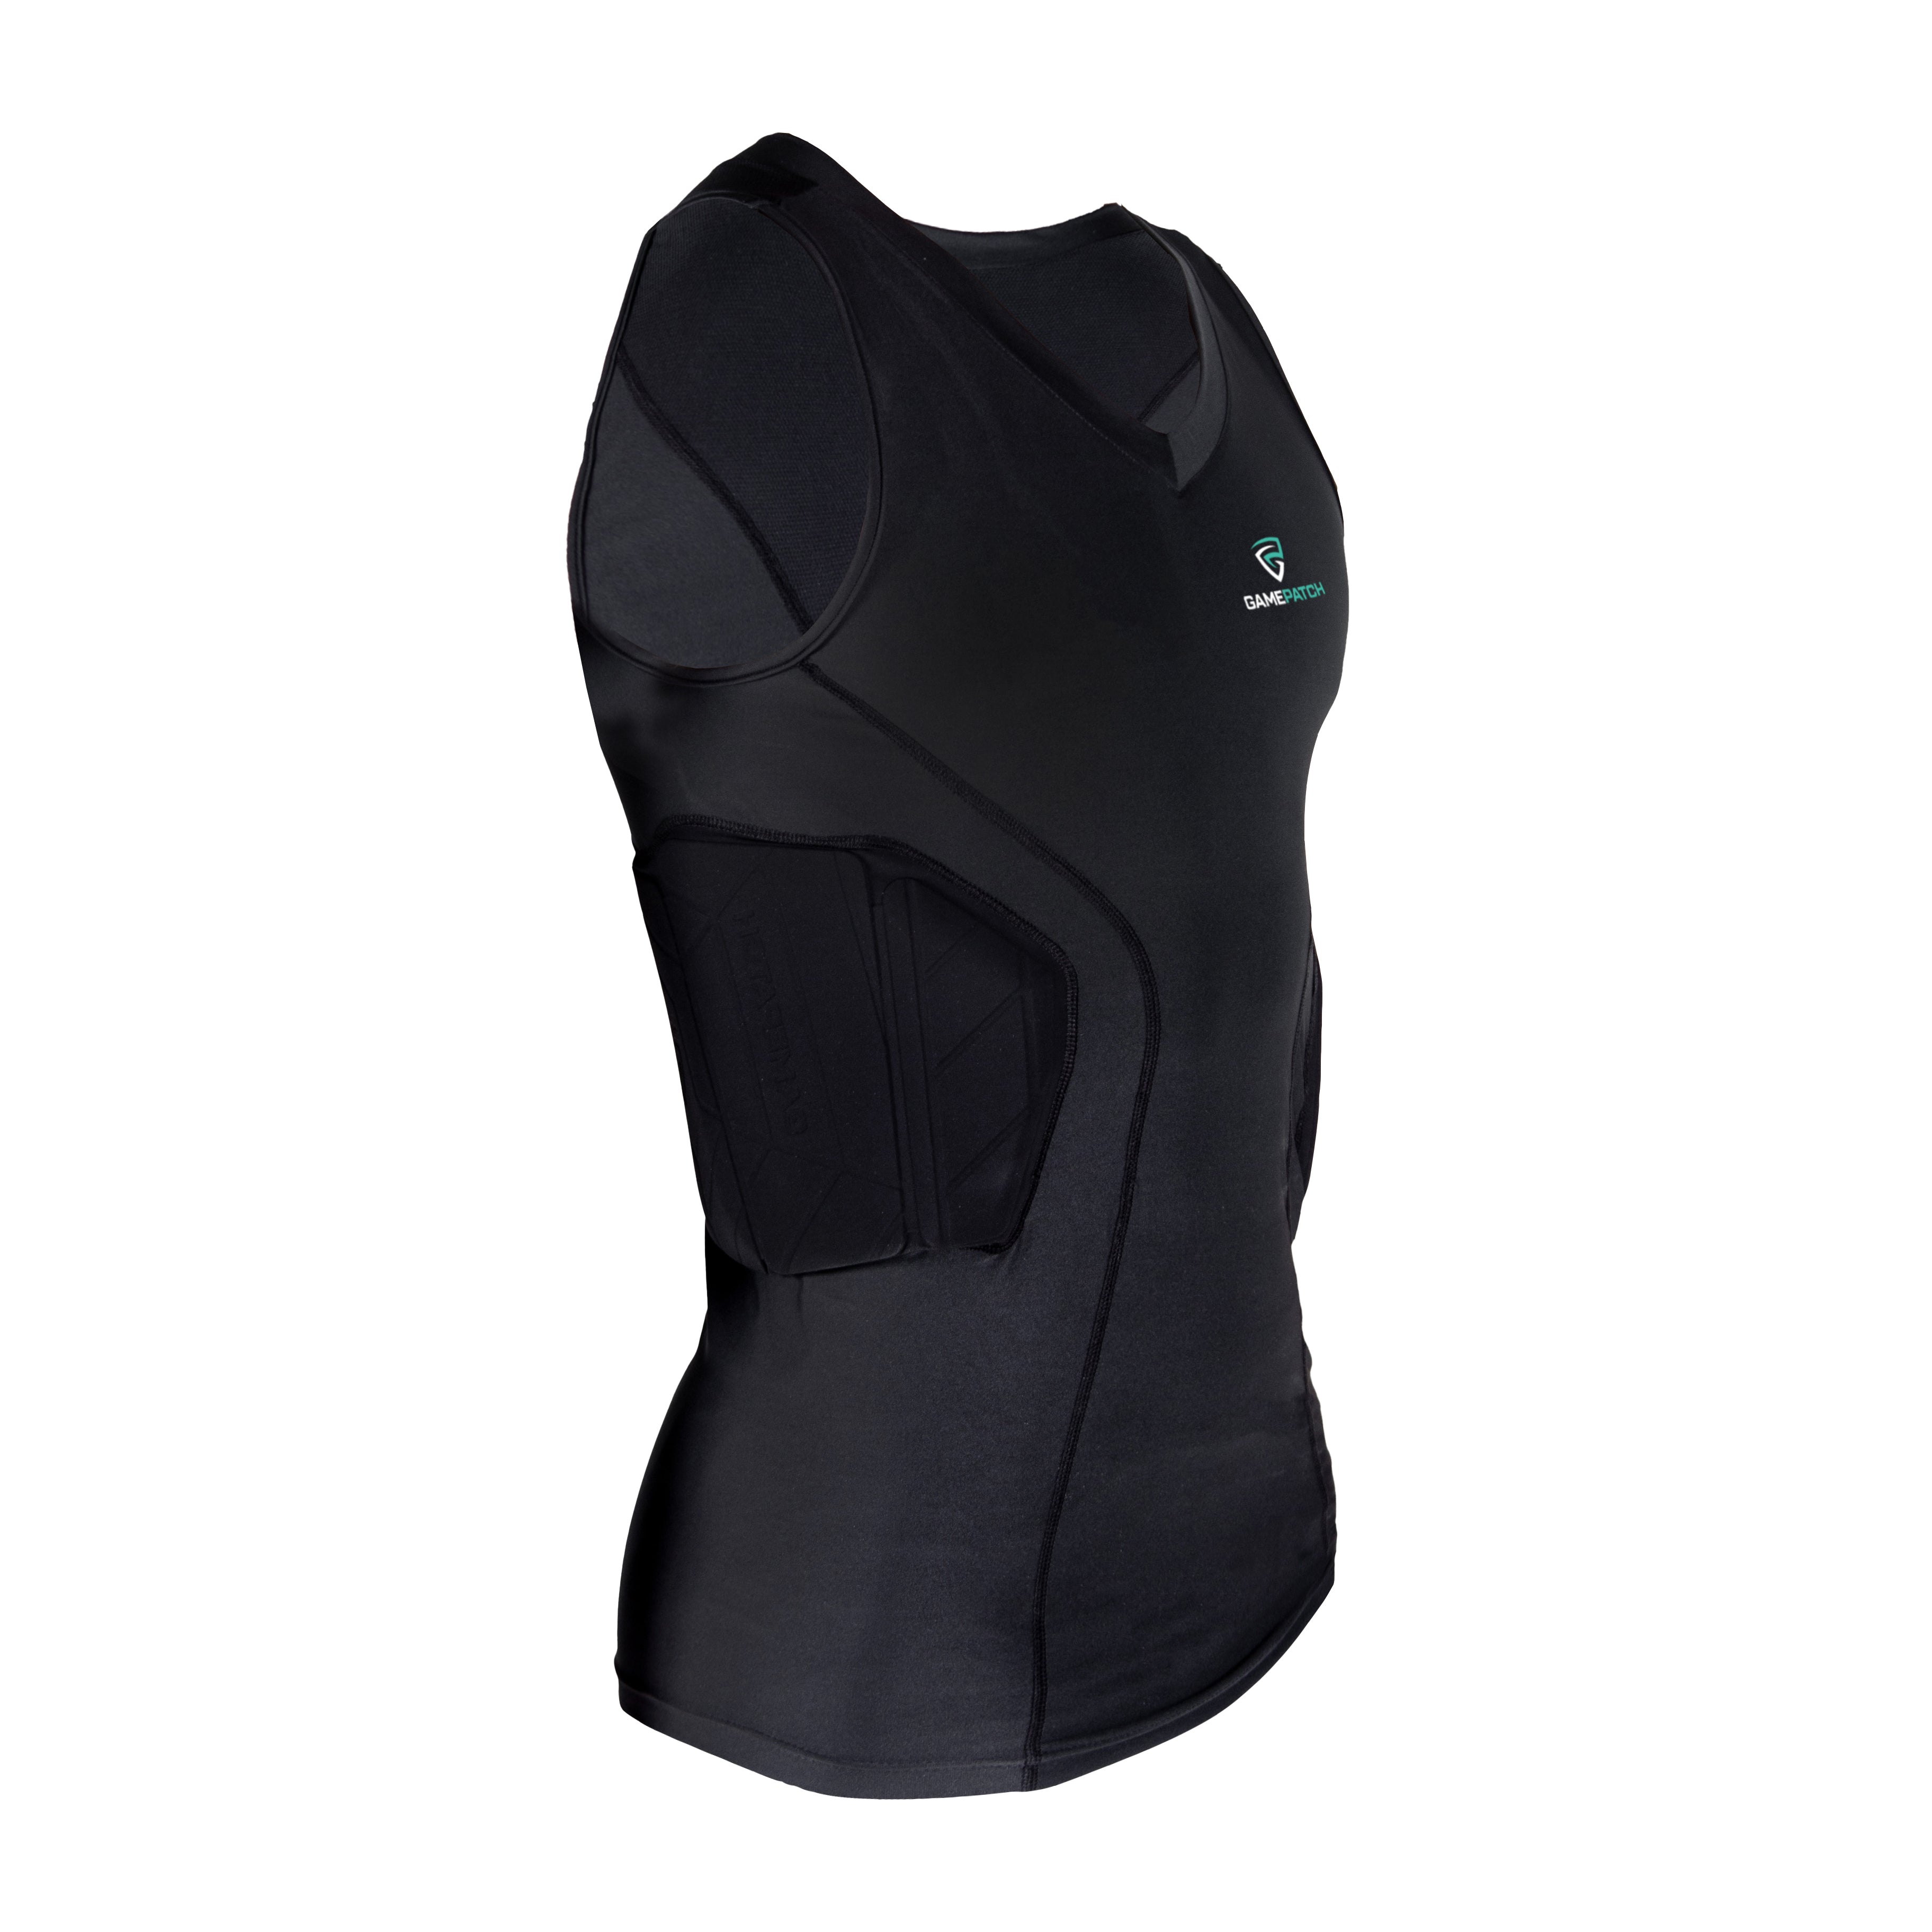 Padded Compression Shirt/ Sleeveless - Free head tie with purchase